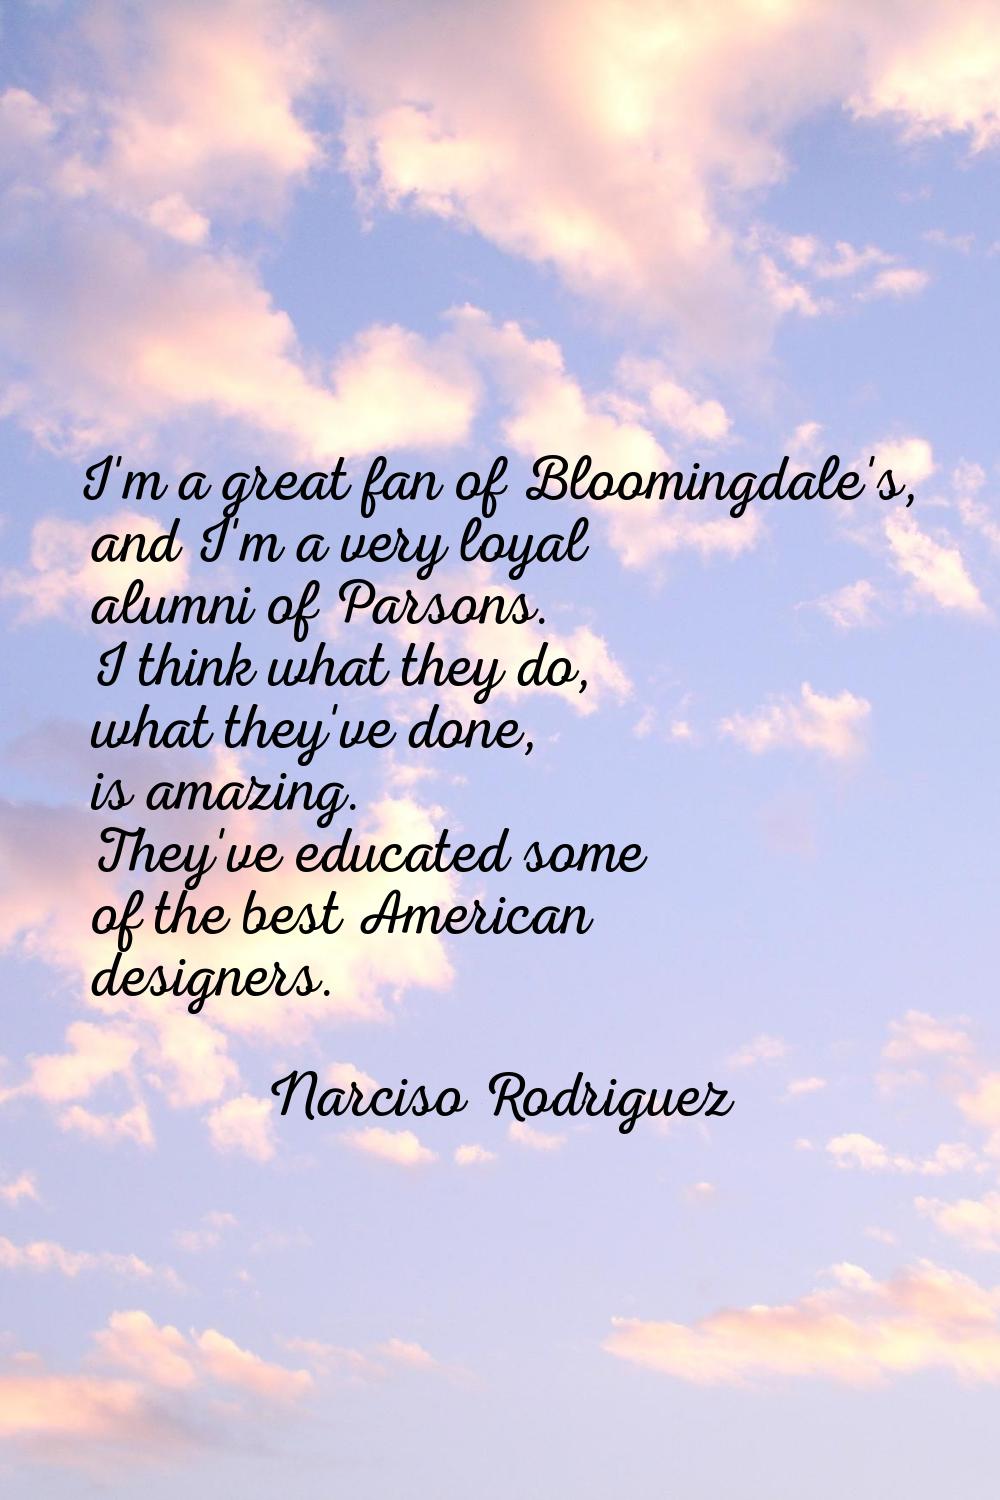 I'm a great fan of Bloomingdale's, and I'm a very loyal alumni of Parsons. I think what they do, wh